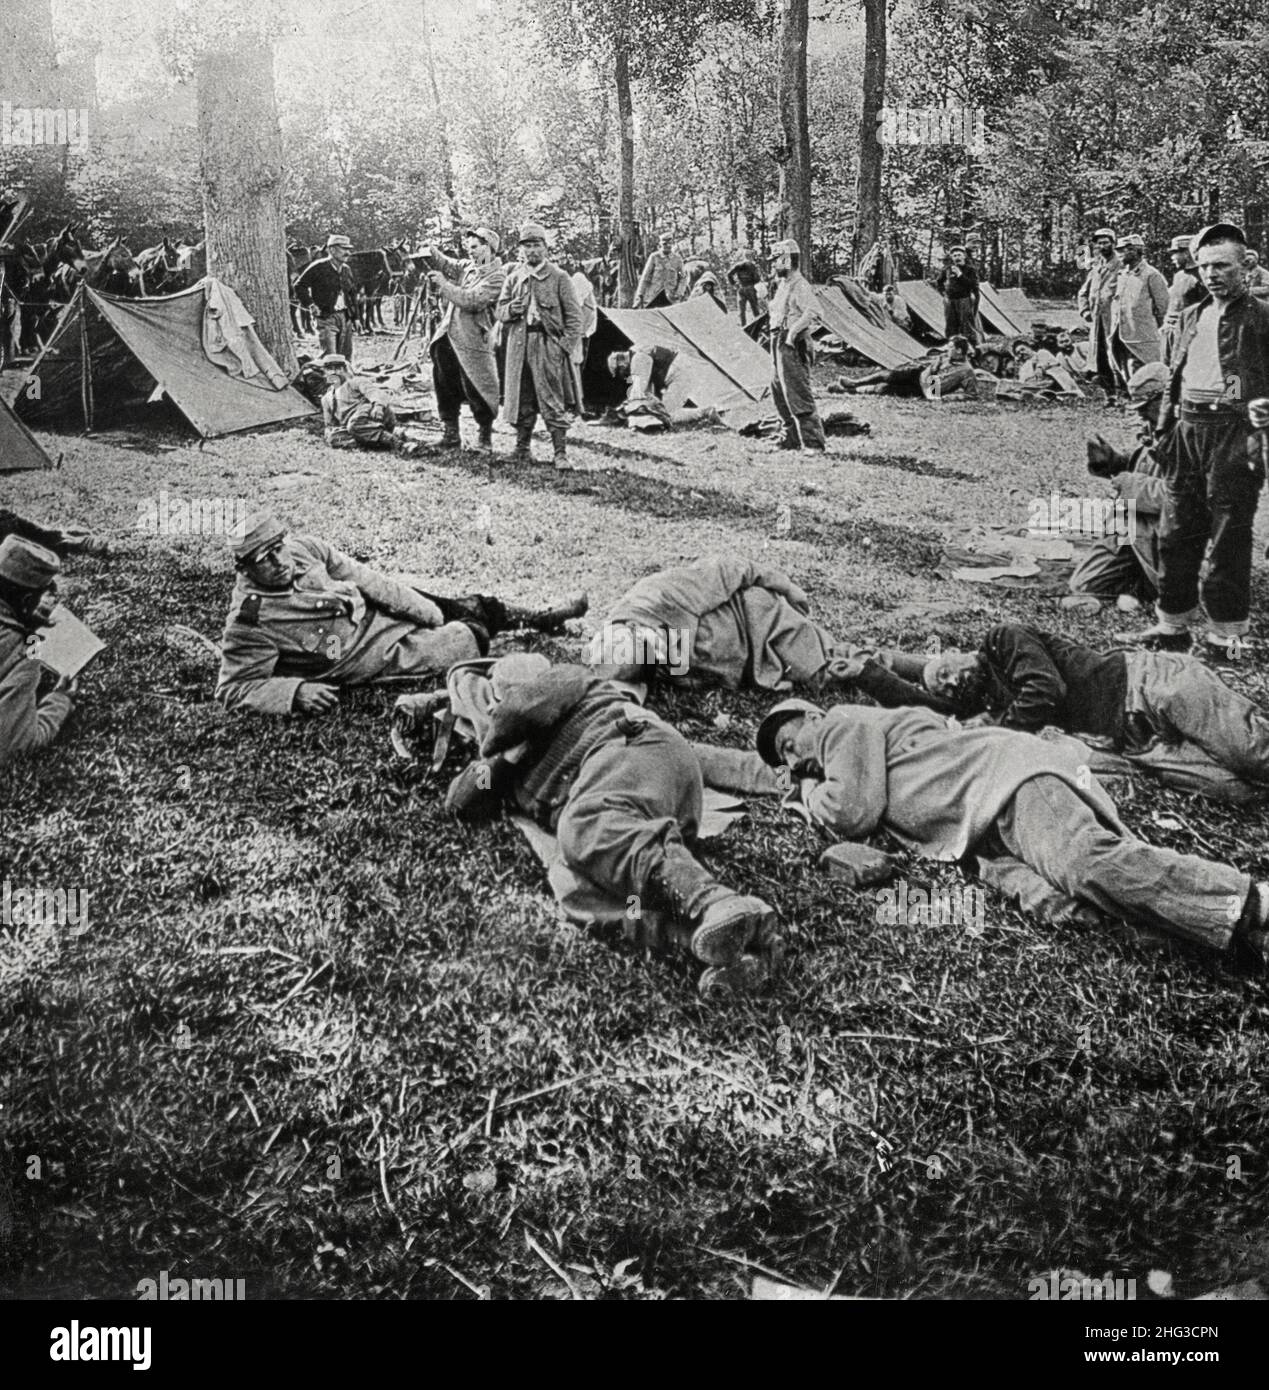 Vintage photo of World War I. 1914-1918. Camp of French artillerymen enjoying well-earned rest from trench warfare. France Stock Photo